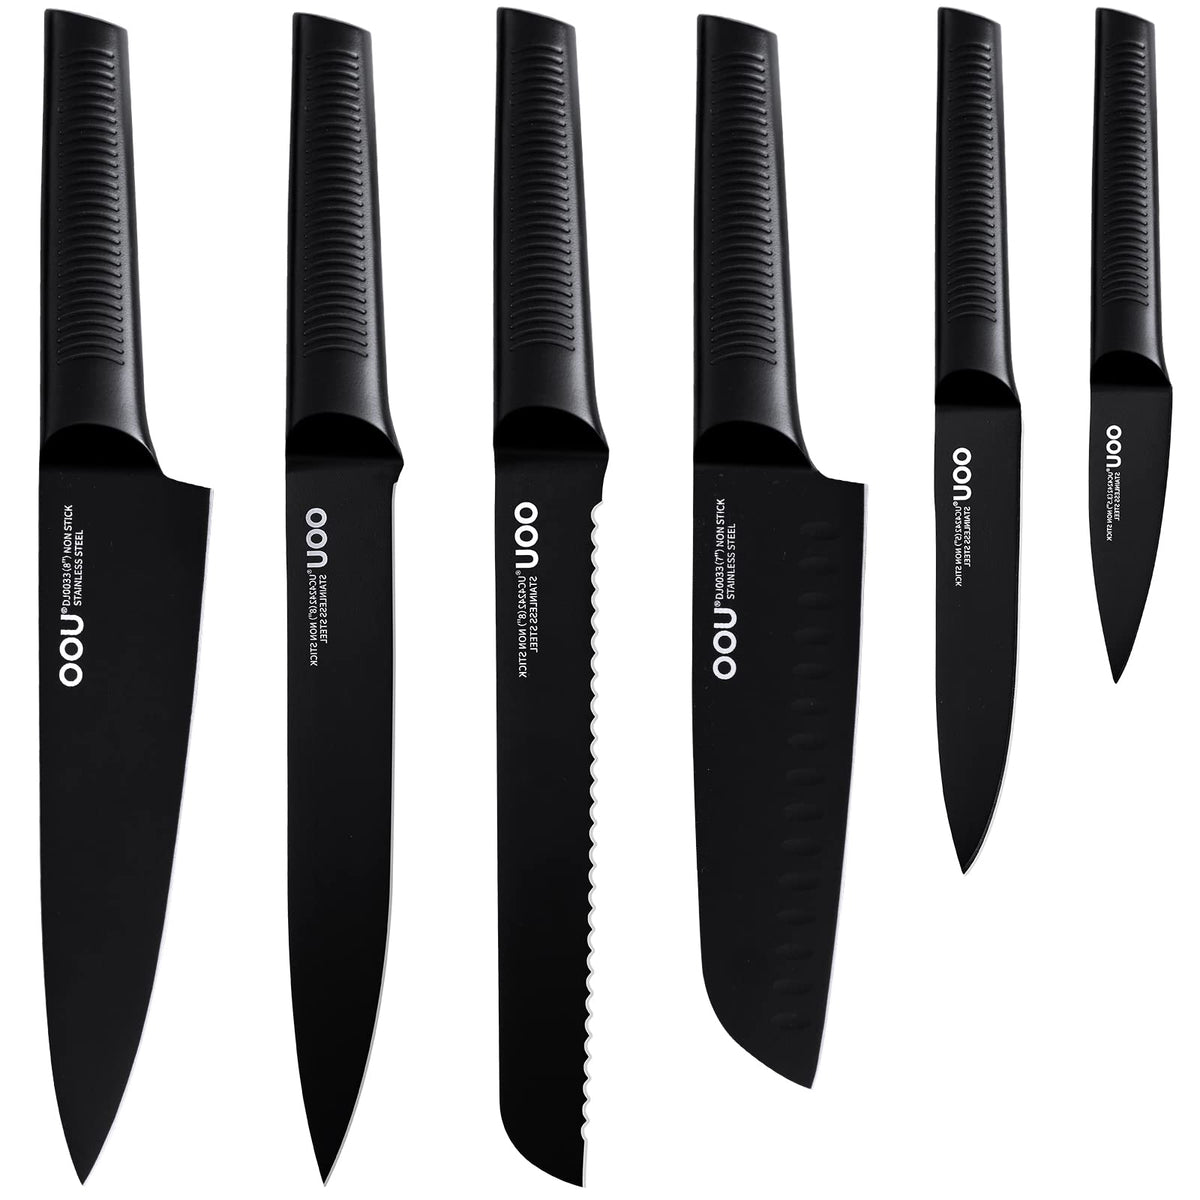 OOU! Kitchen Knife Set with Block, 15 Pieces High Carbon Stainless Steel  Knife Block Set, Professional Chef Knife Set with Built-in Sharpener